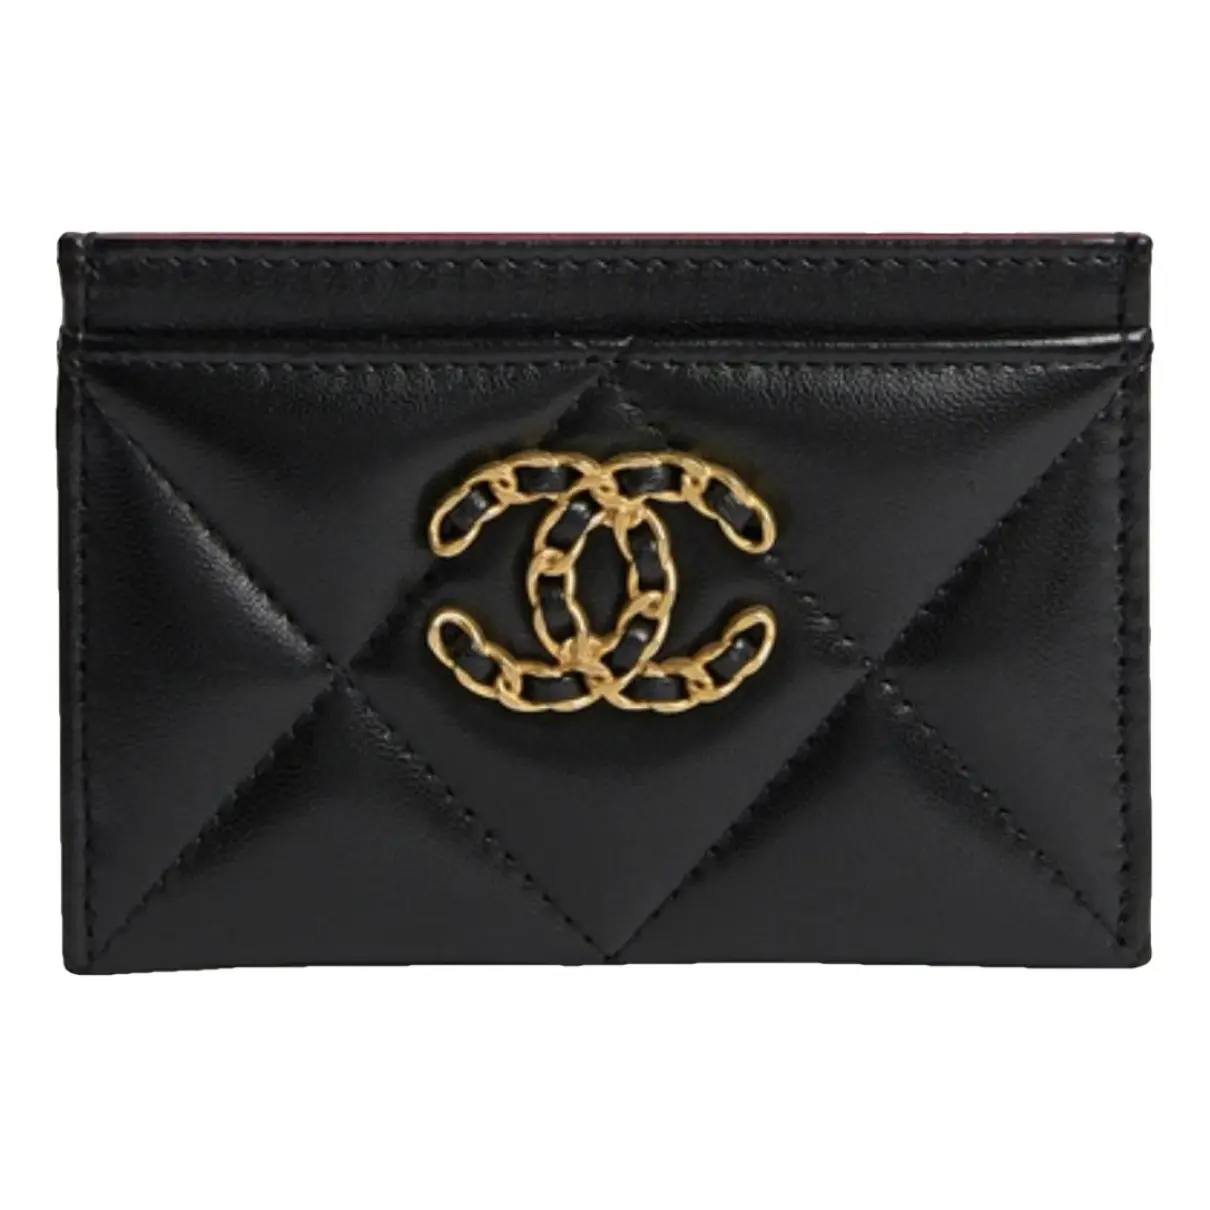 Chanel 19 leather card wallet